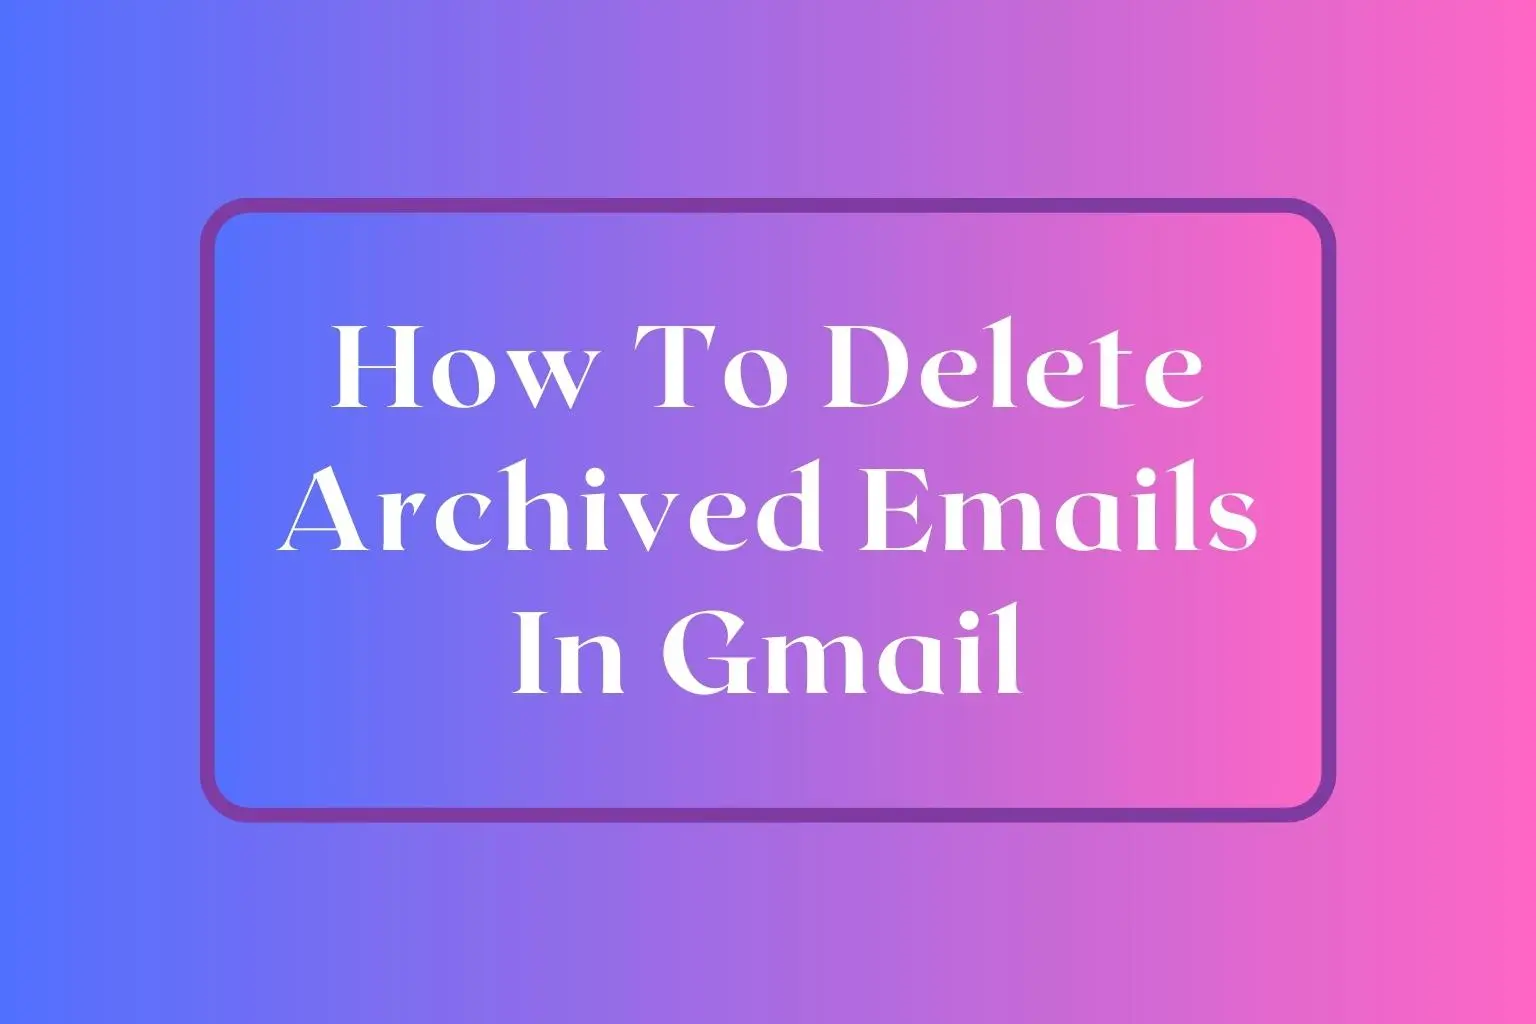 How To Delete Archived Emails In Gmail